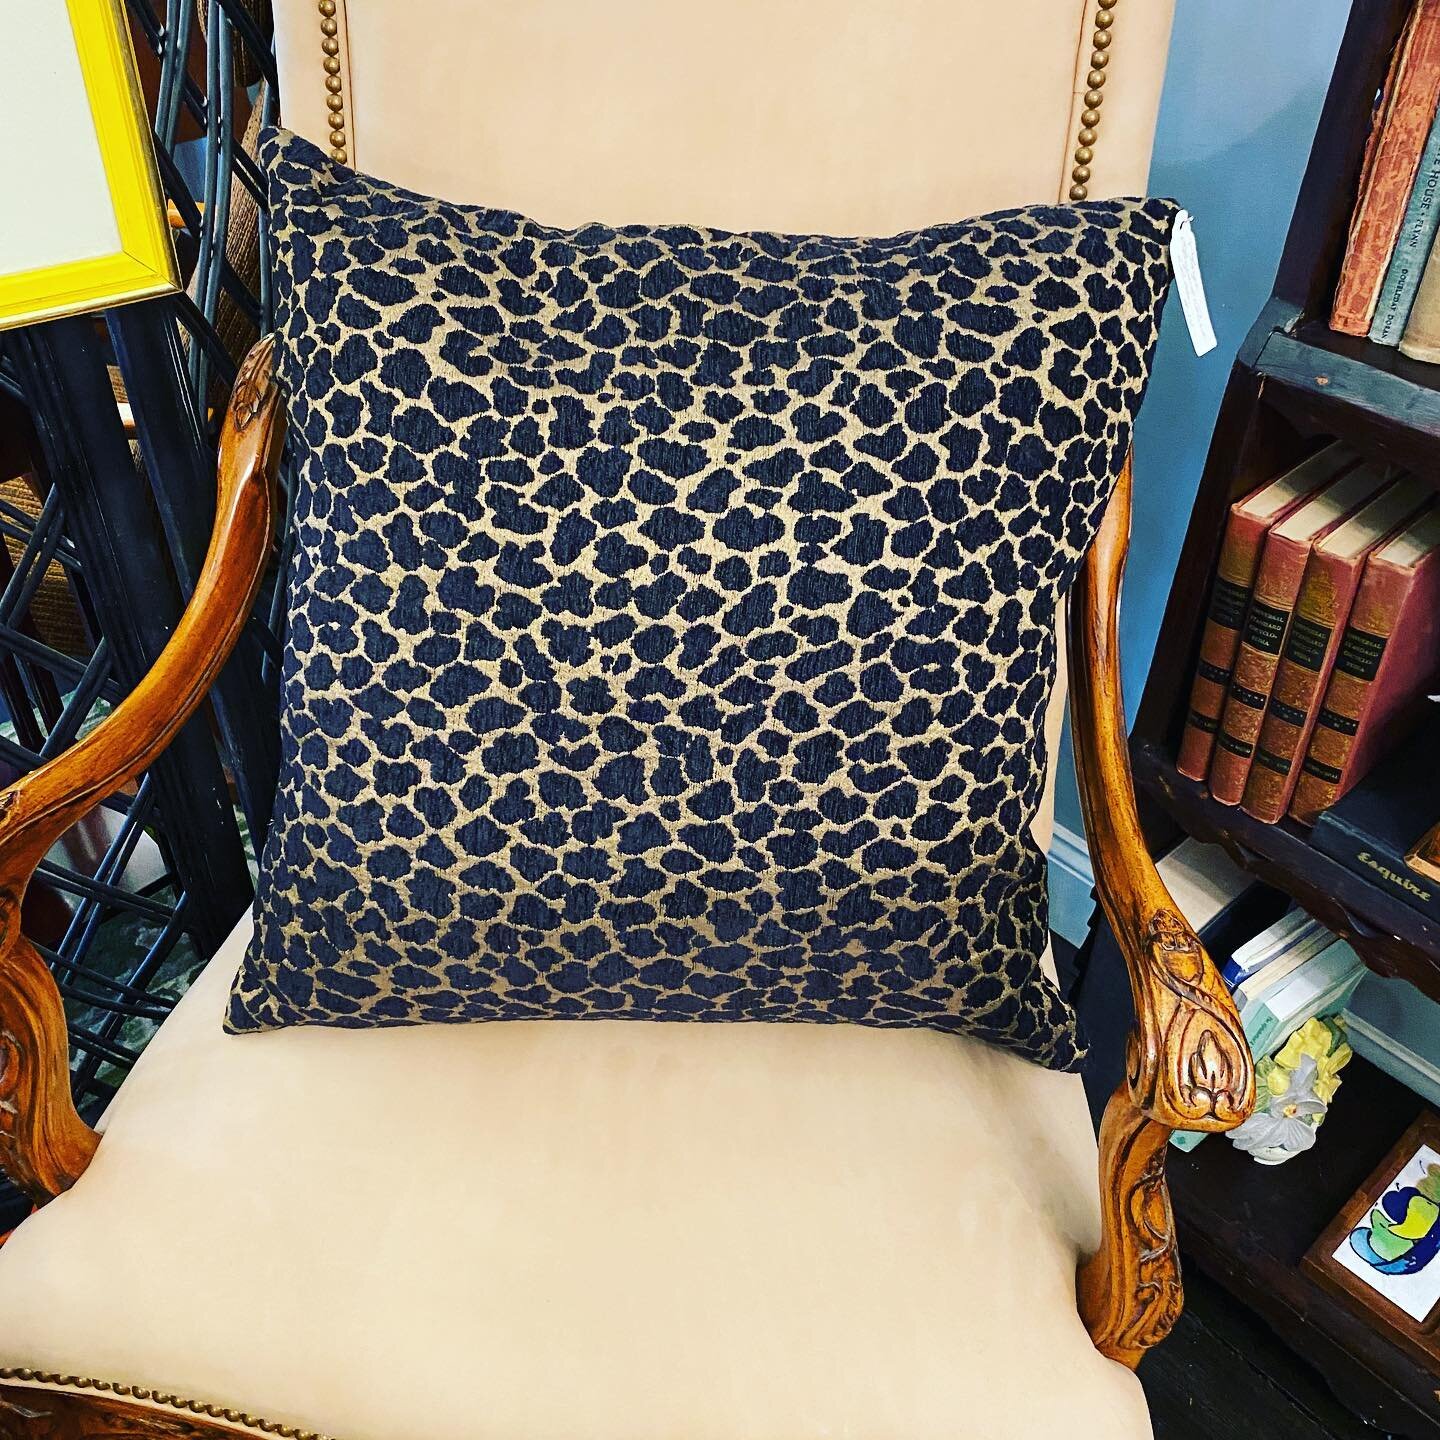 Mix in a New Pattern with Throw Pillows